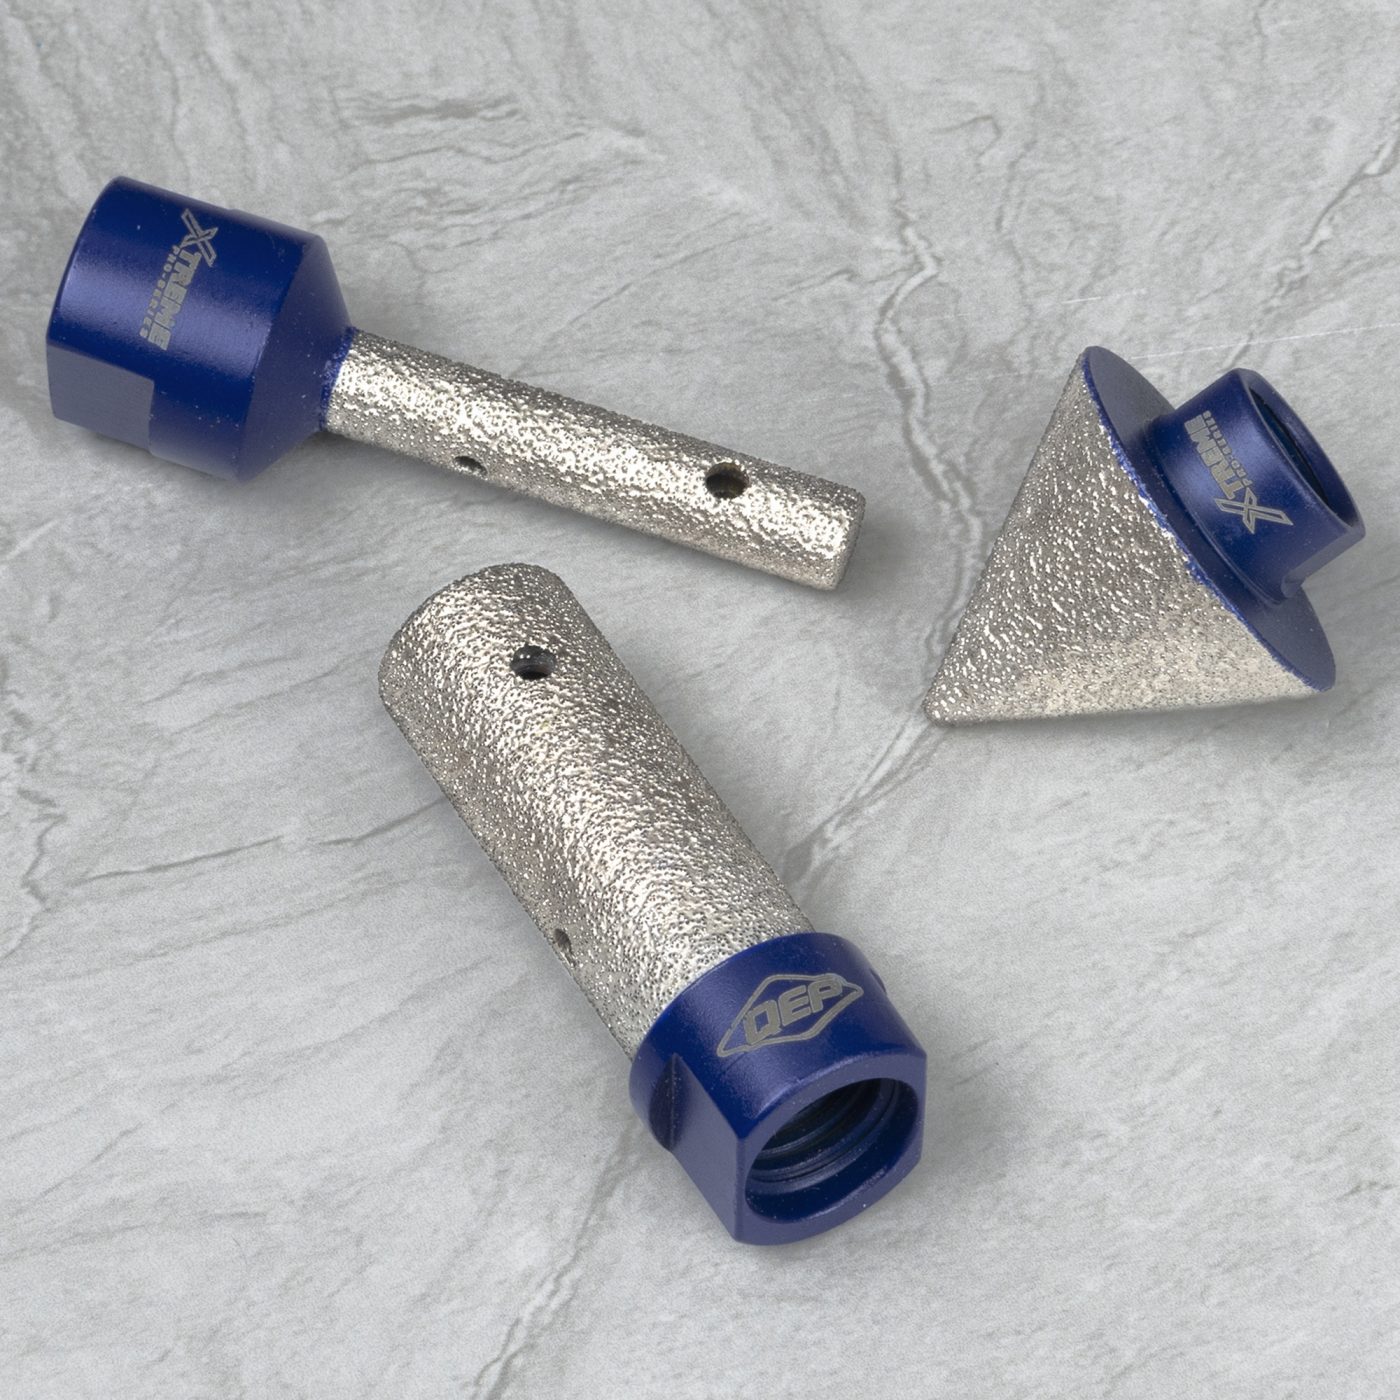 Xtreme Diamond Milling Bits and Cone